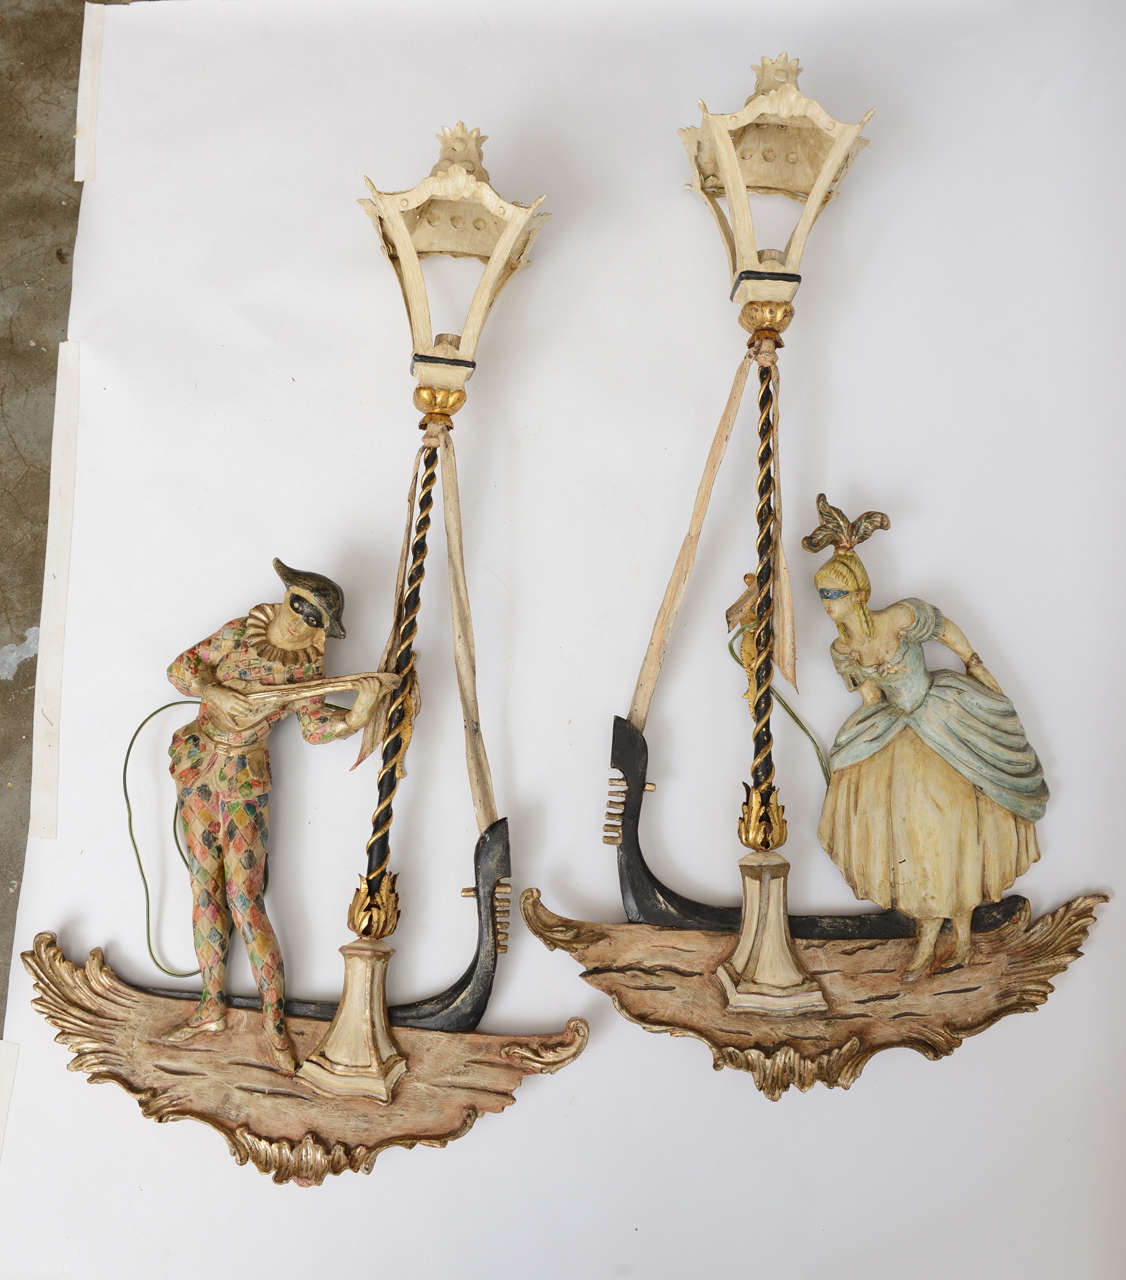 Unusual and whimsical carved Venetian figures in Gondola boats with metal, lighted torches. Hand painted.